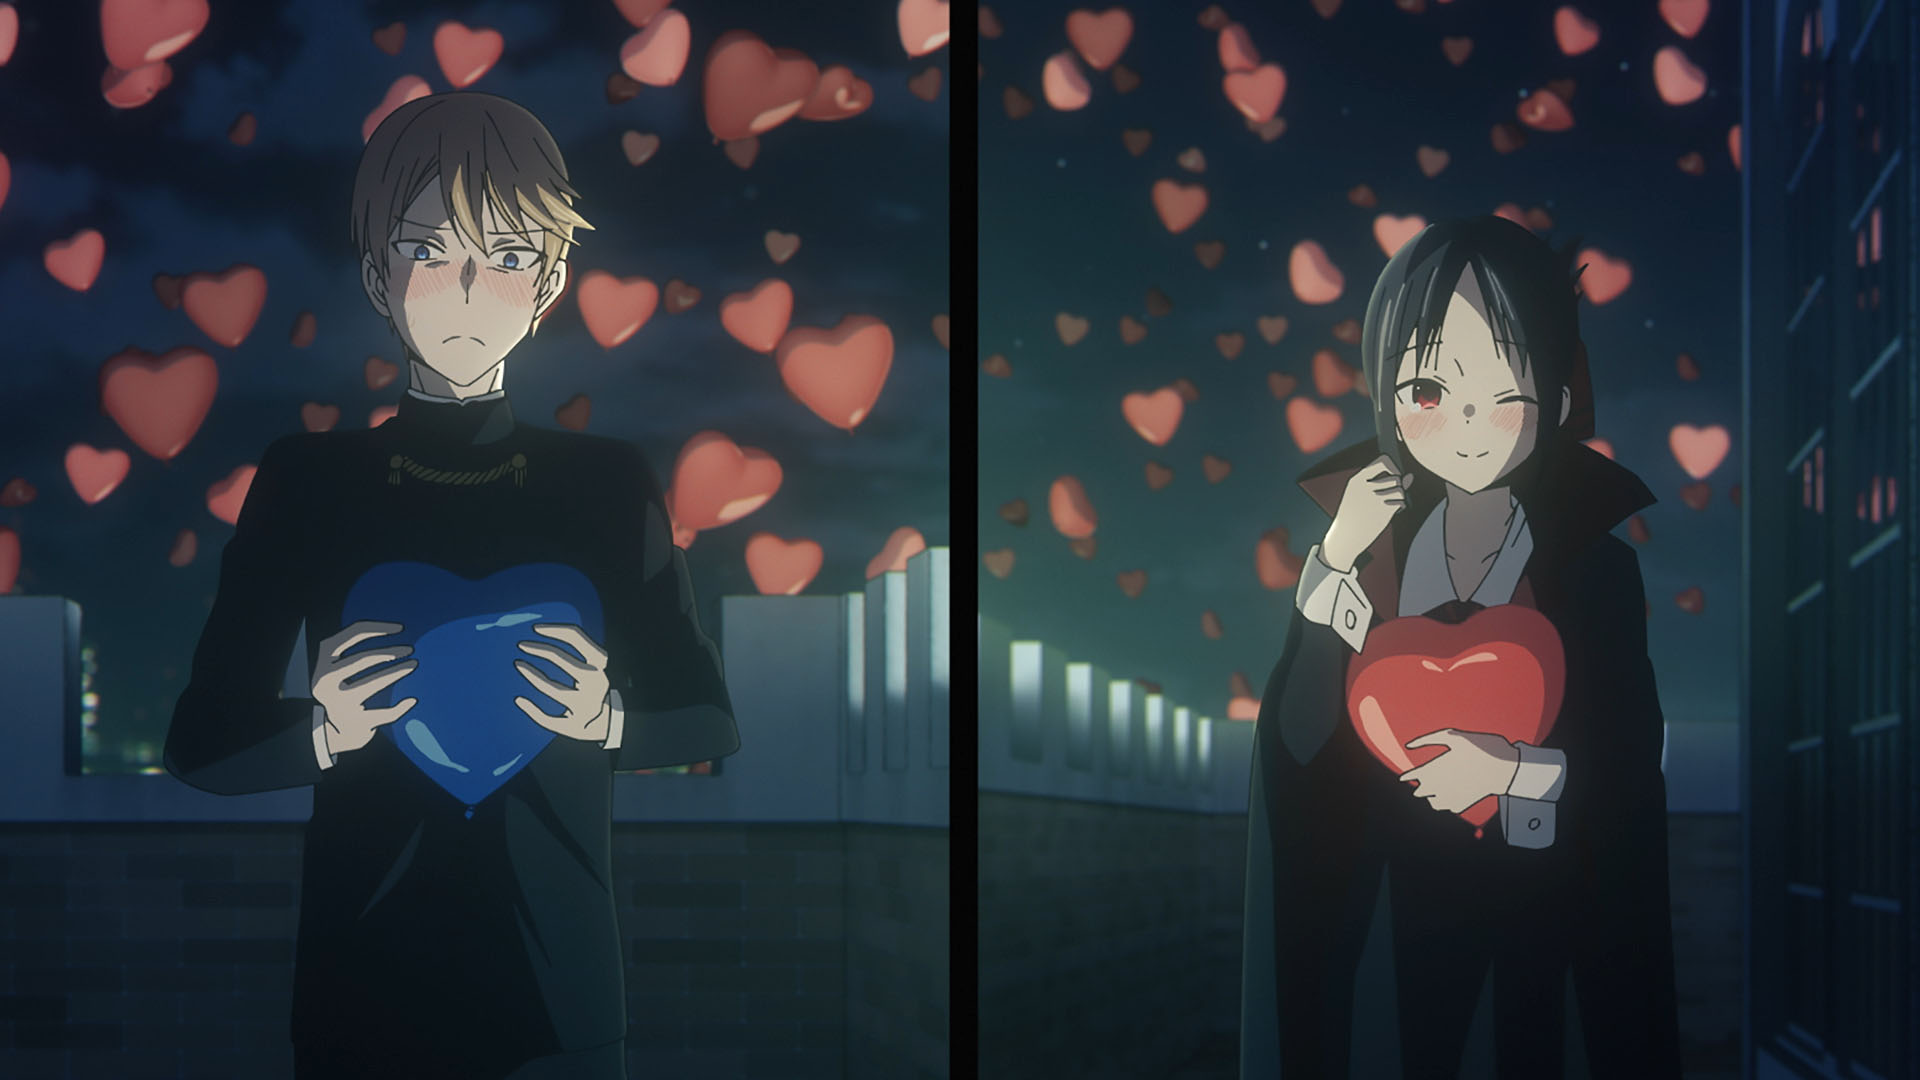 Kaguya-sama: Love is War -The First Kiss That Never Ends- Heads to U.S. Theaters in February 2023